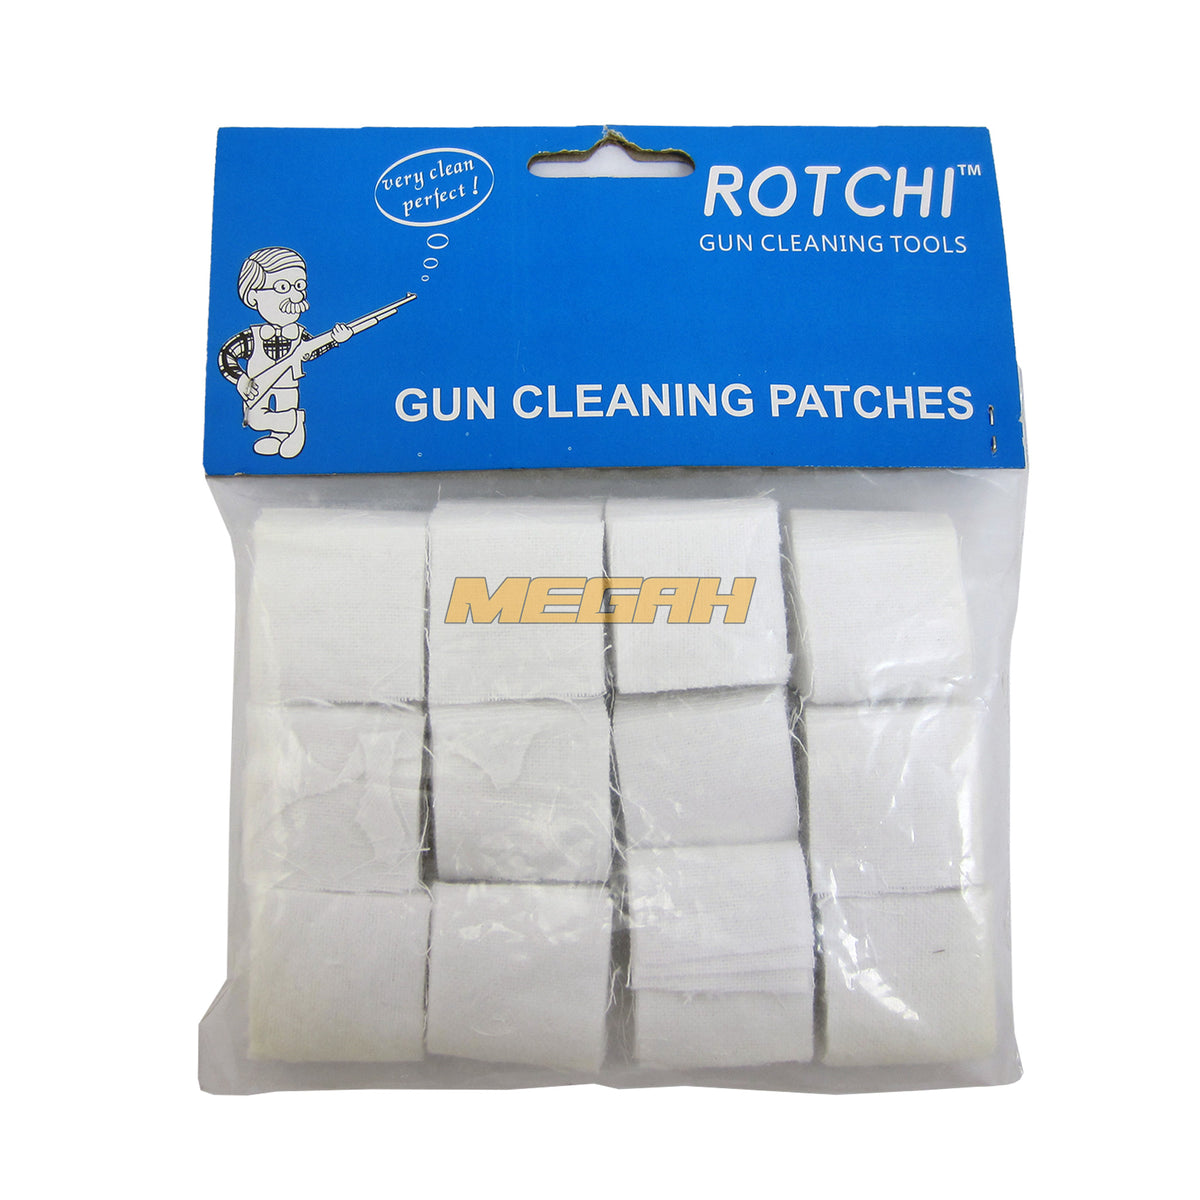 CLEANING PATCH KAL .22 (AS649) - Megah Sport